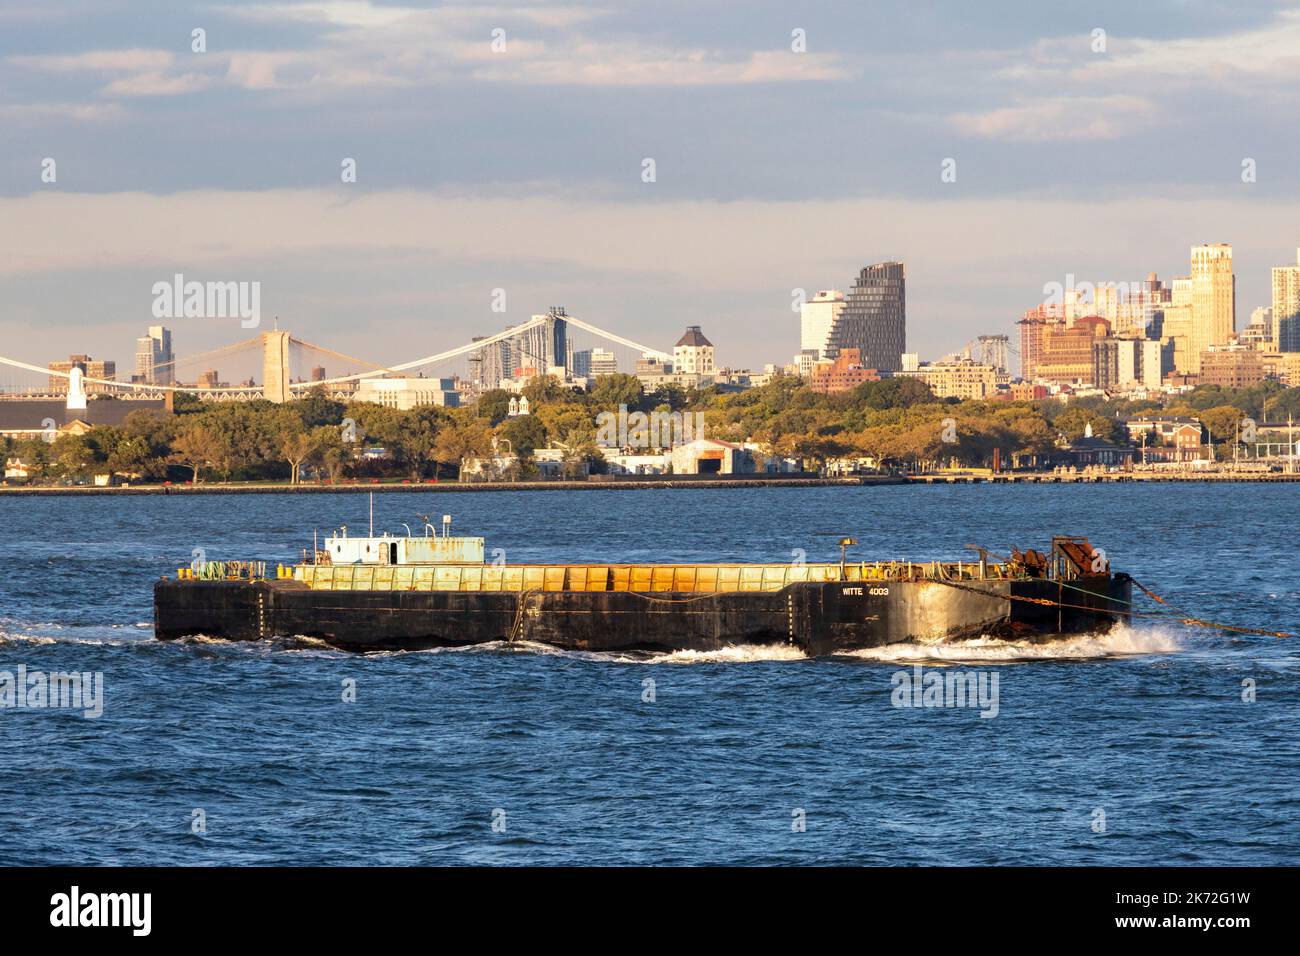 Dump Scow Witte 4003 Barge, New York Harbour, USA Stockfoto